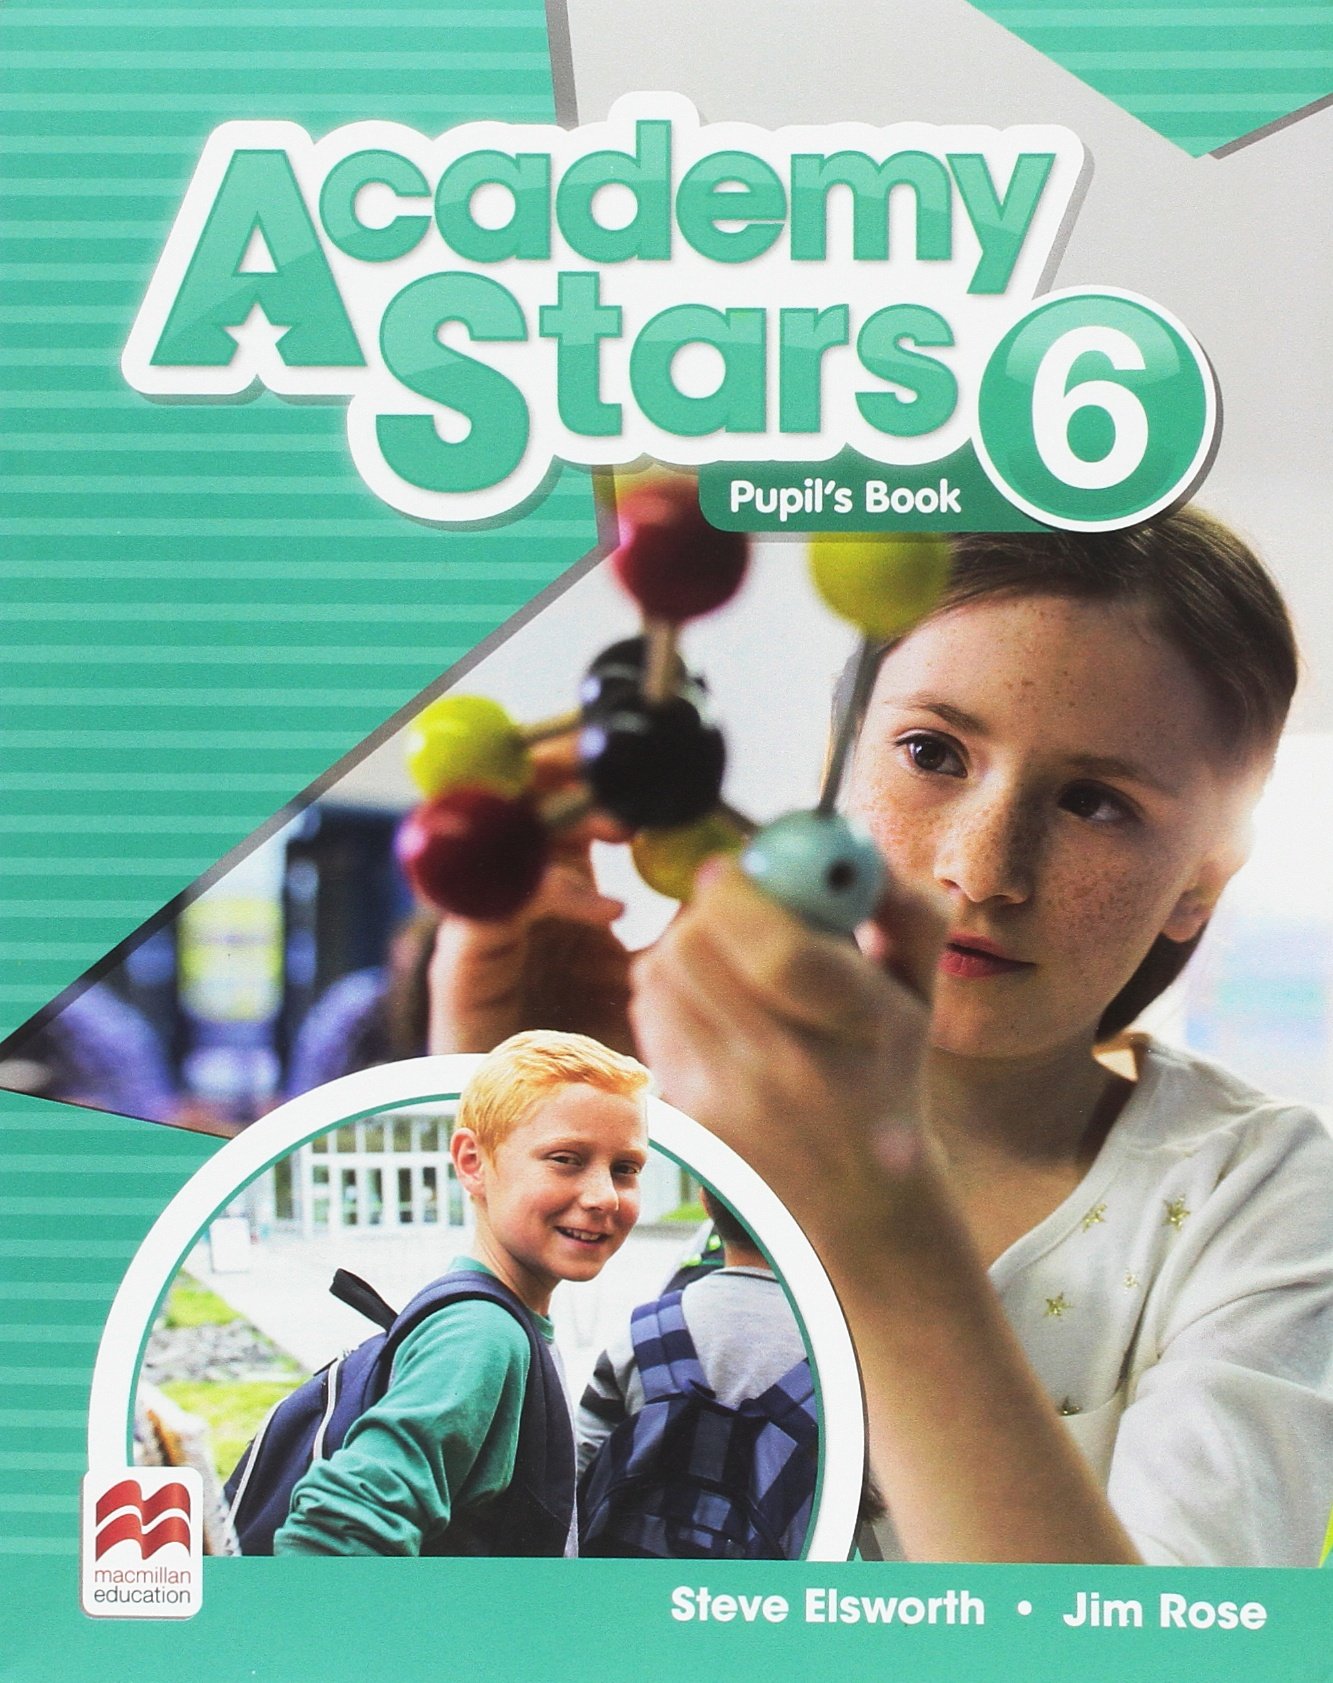 ACADEMY STARS 6 Pupil's Book Pack